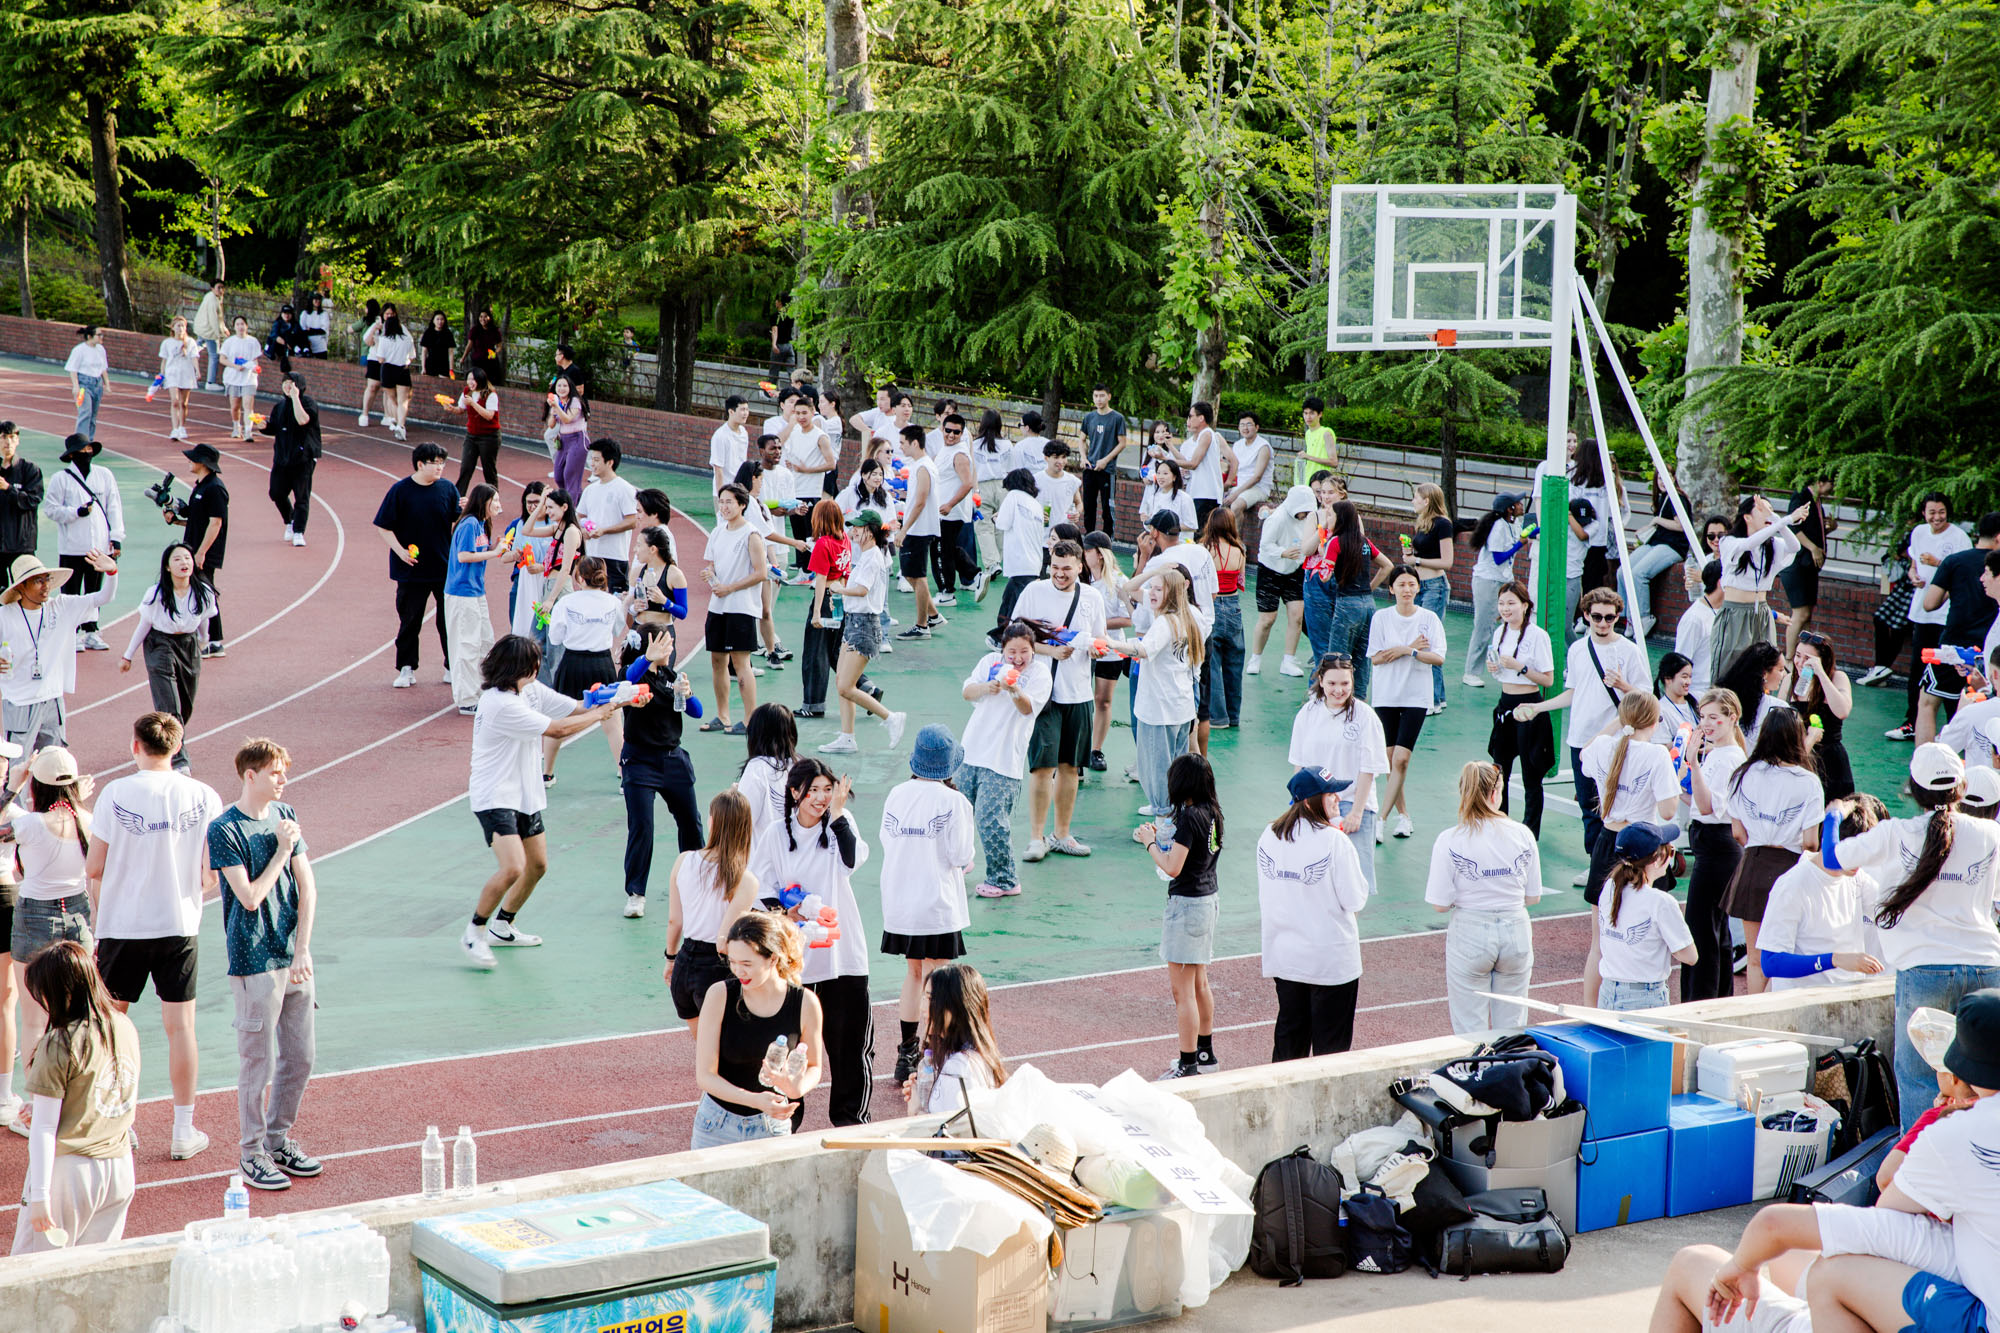 Day 2 of Woosong Sports Day: A Celebration of Energy, Competition, and Community